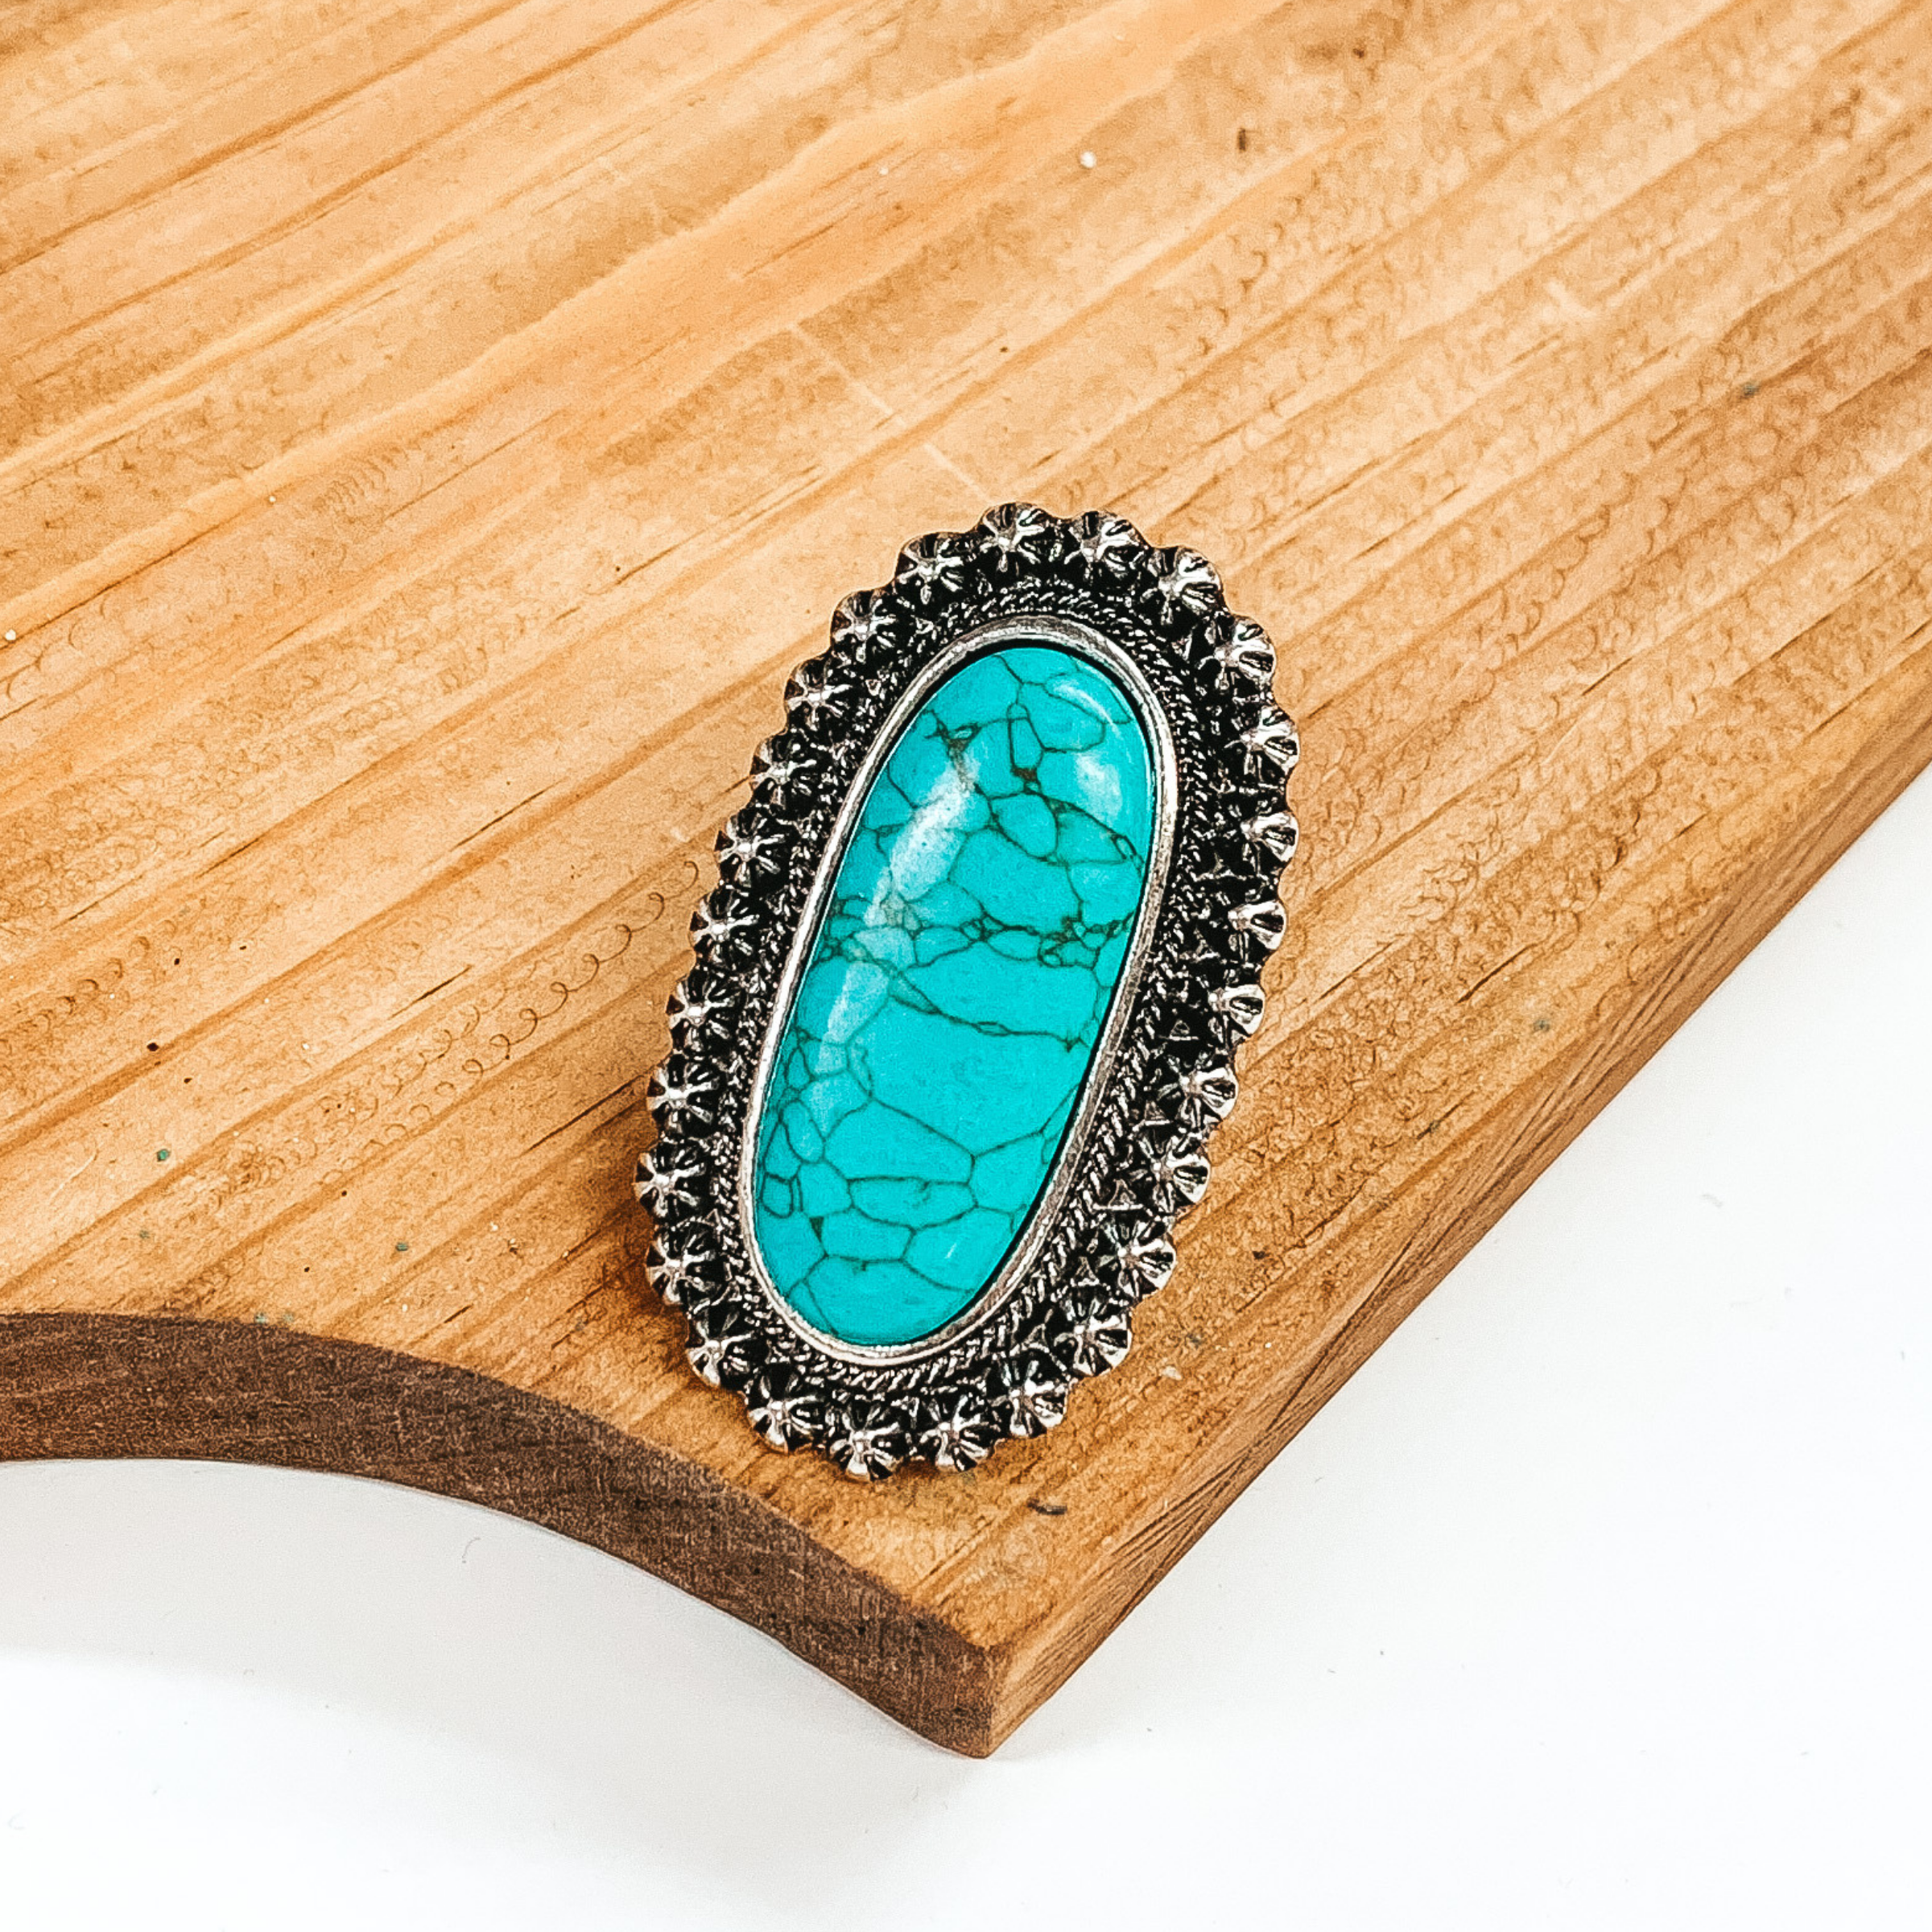 Silver cuff ring with oval, turquoise stone and silver, intricate detailed outline. This ring is pictured on a brown block on a white background.